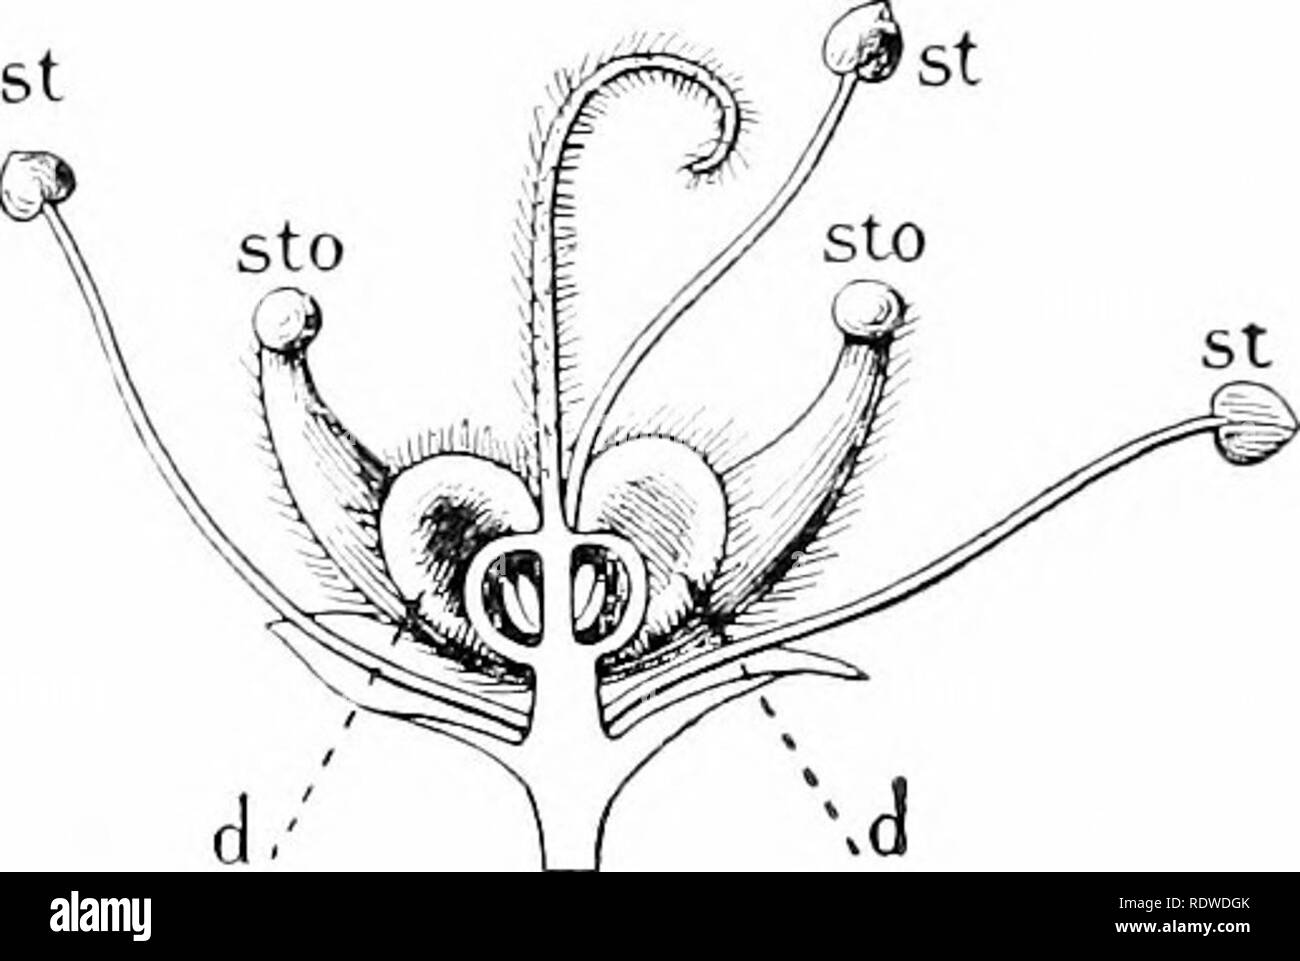 . Plants and their ways in South Africa. Botany; Botany. Stamens of Cyandla ca- Fig. 129.—.Section through flower of Barosma oxnulafa, Hook., after the removal of the petals (magnified) ; st, fertile stamens ; ^to, barren stamens (staminodes) ; rf, lobes of disk. (From Edmonds and Marloth's '' Elementary Botany for .South Africa &quot;.) base of the anthers (basifixed). In Jasmine the filaments ex- tend between the anthers (adnate) In grasses and in BuUn&gt;iella the filaments are so joined to the centre of the anther at the back that they easily swing (versatile). Versatile anthers are fre- q Stock Photo